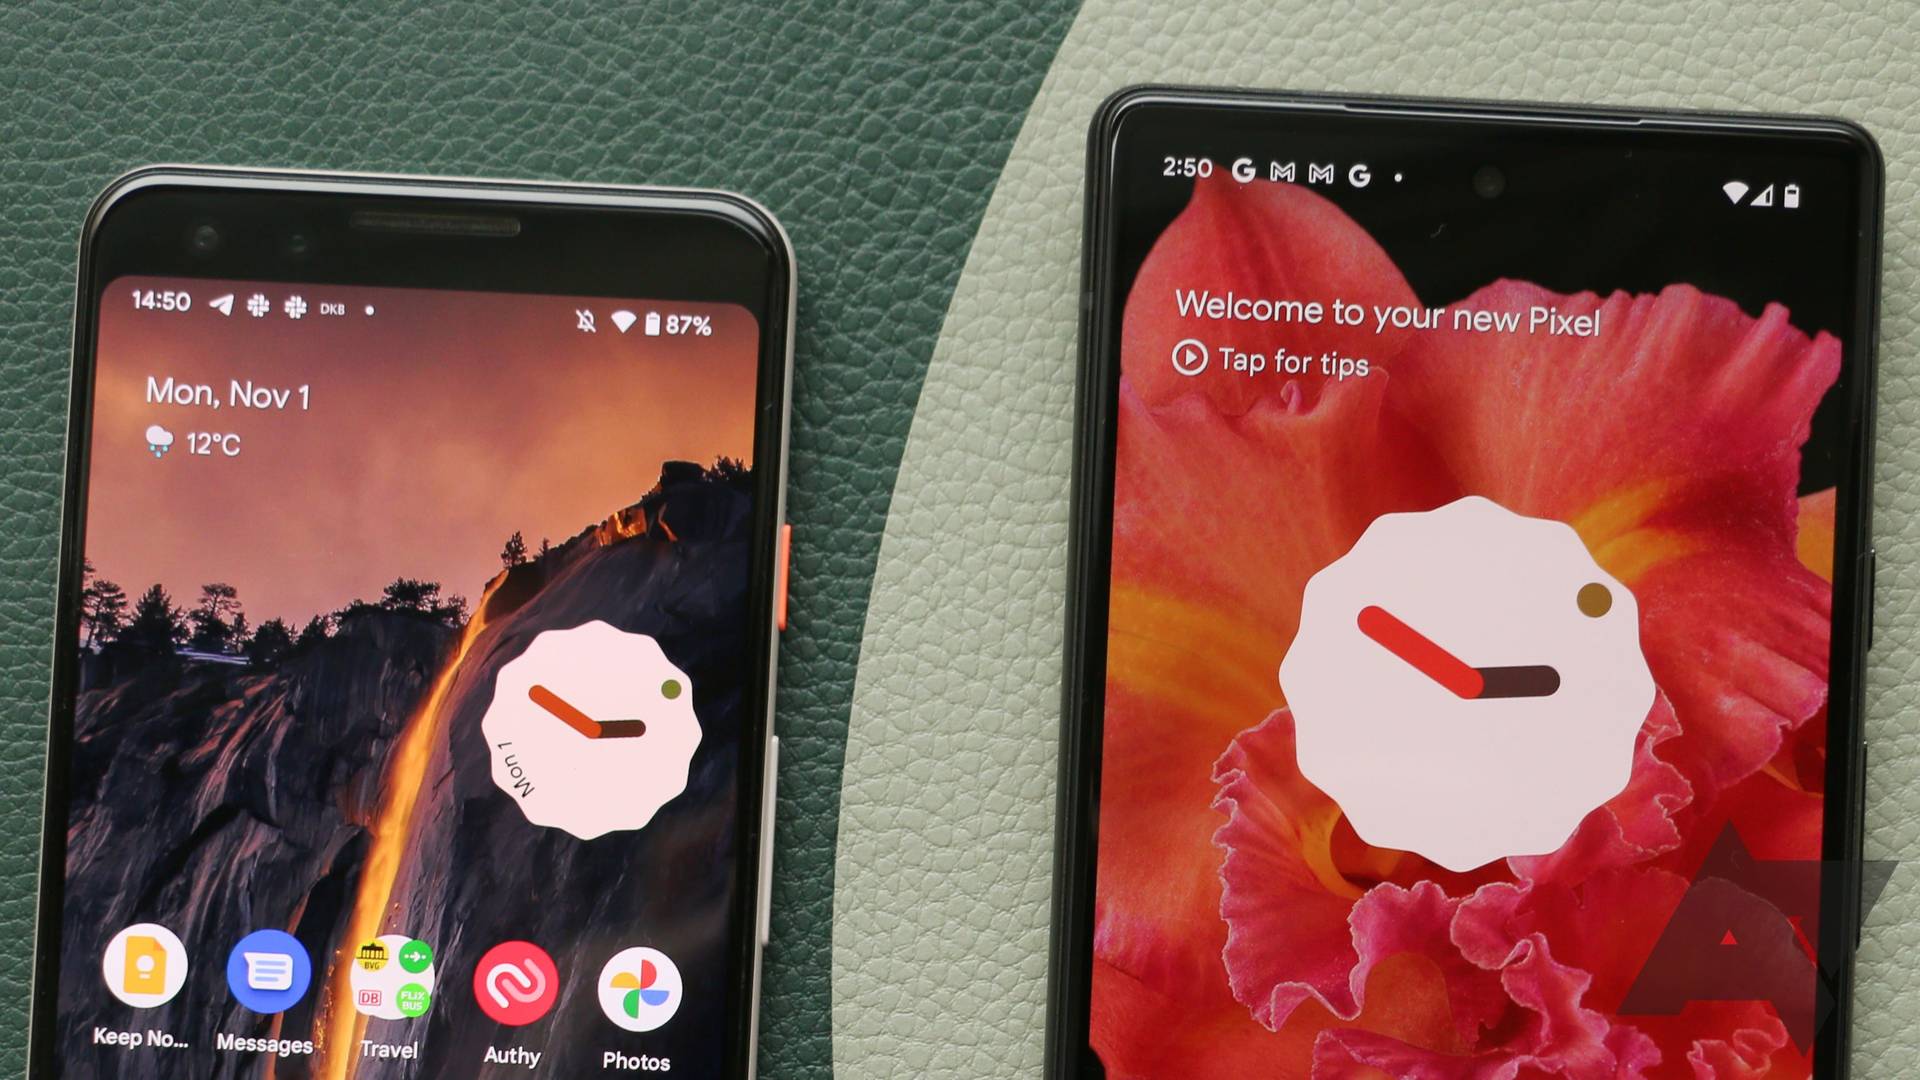 Google is widely rolling out At a Glance enhancements for Pixel phones